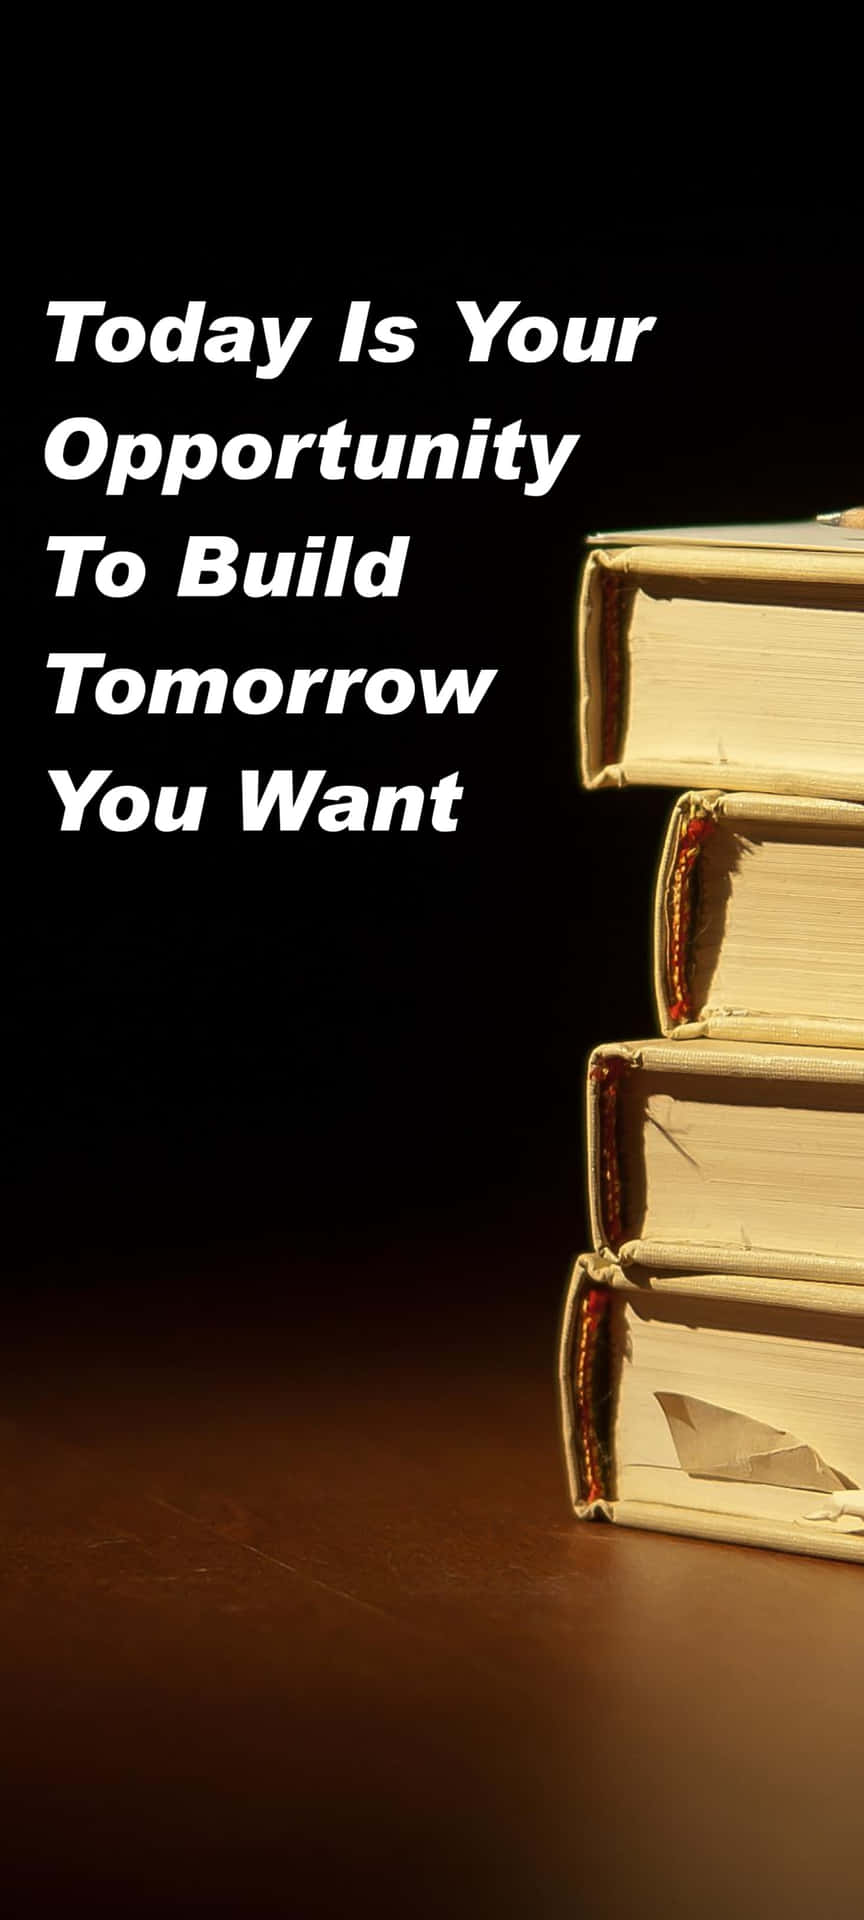 Today Is Your Opportunity To Build Tomorrow You Want Wallpaper